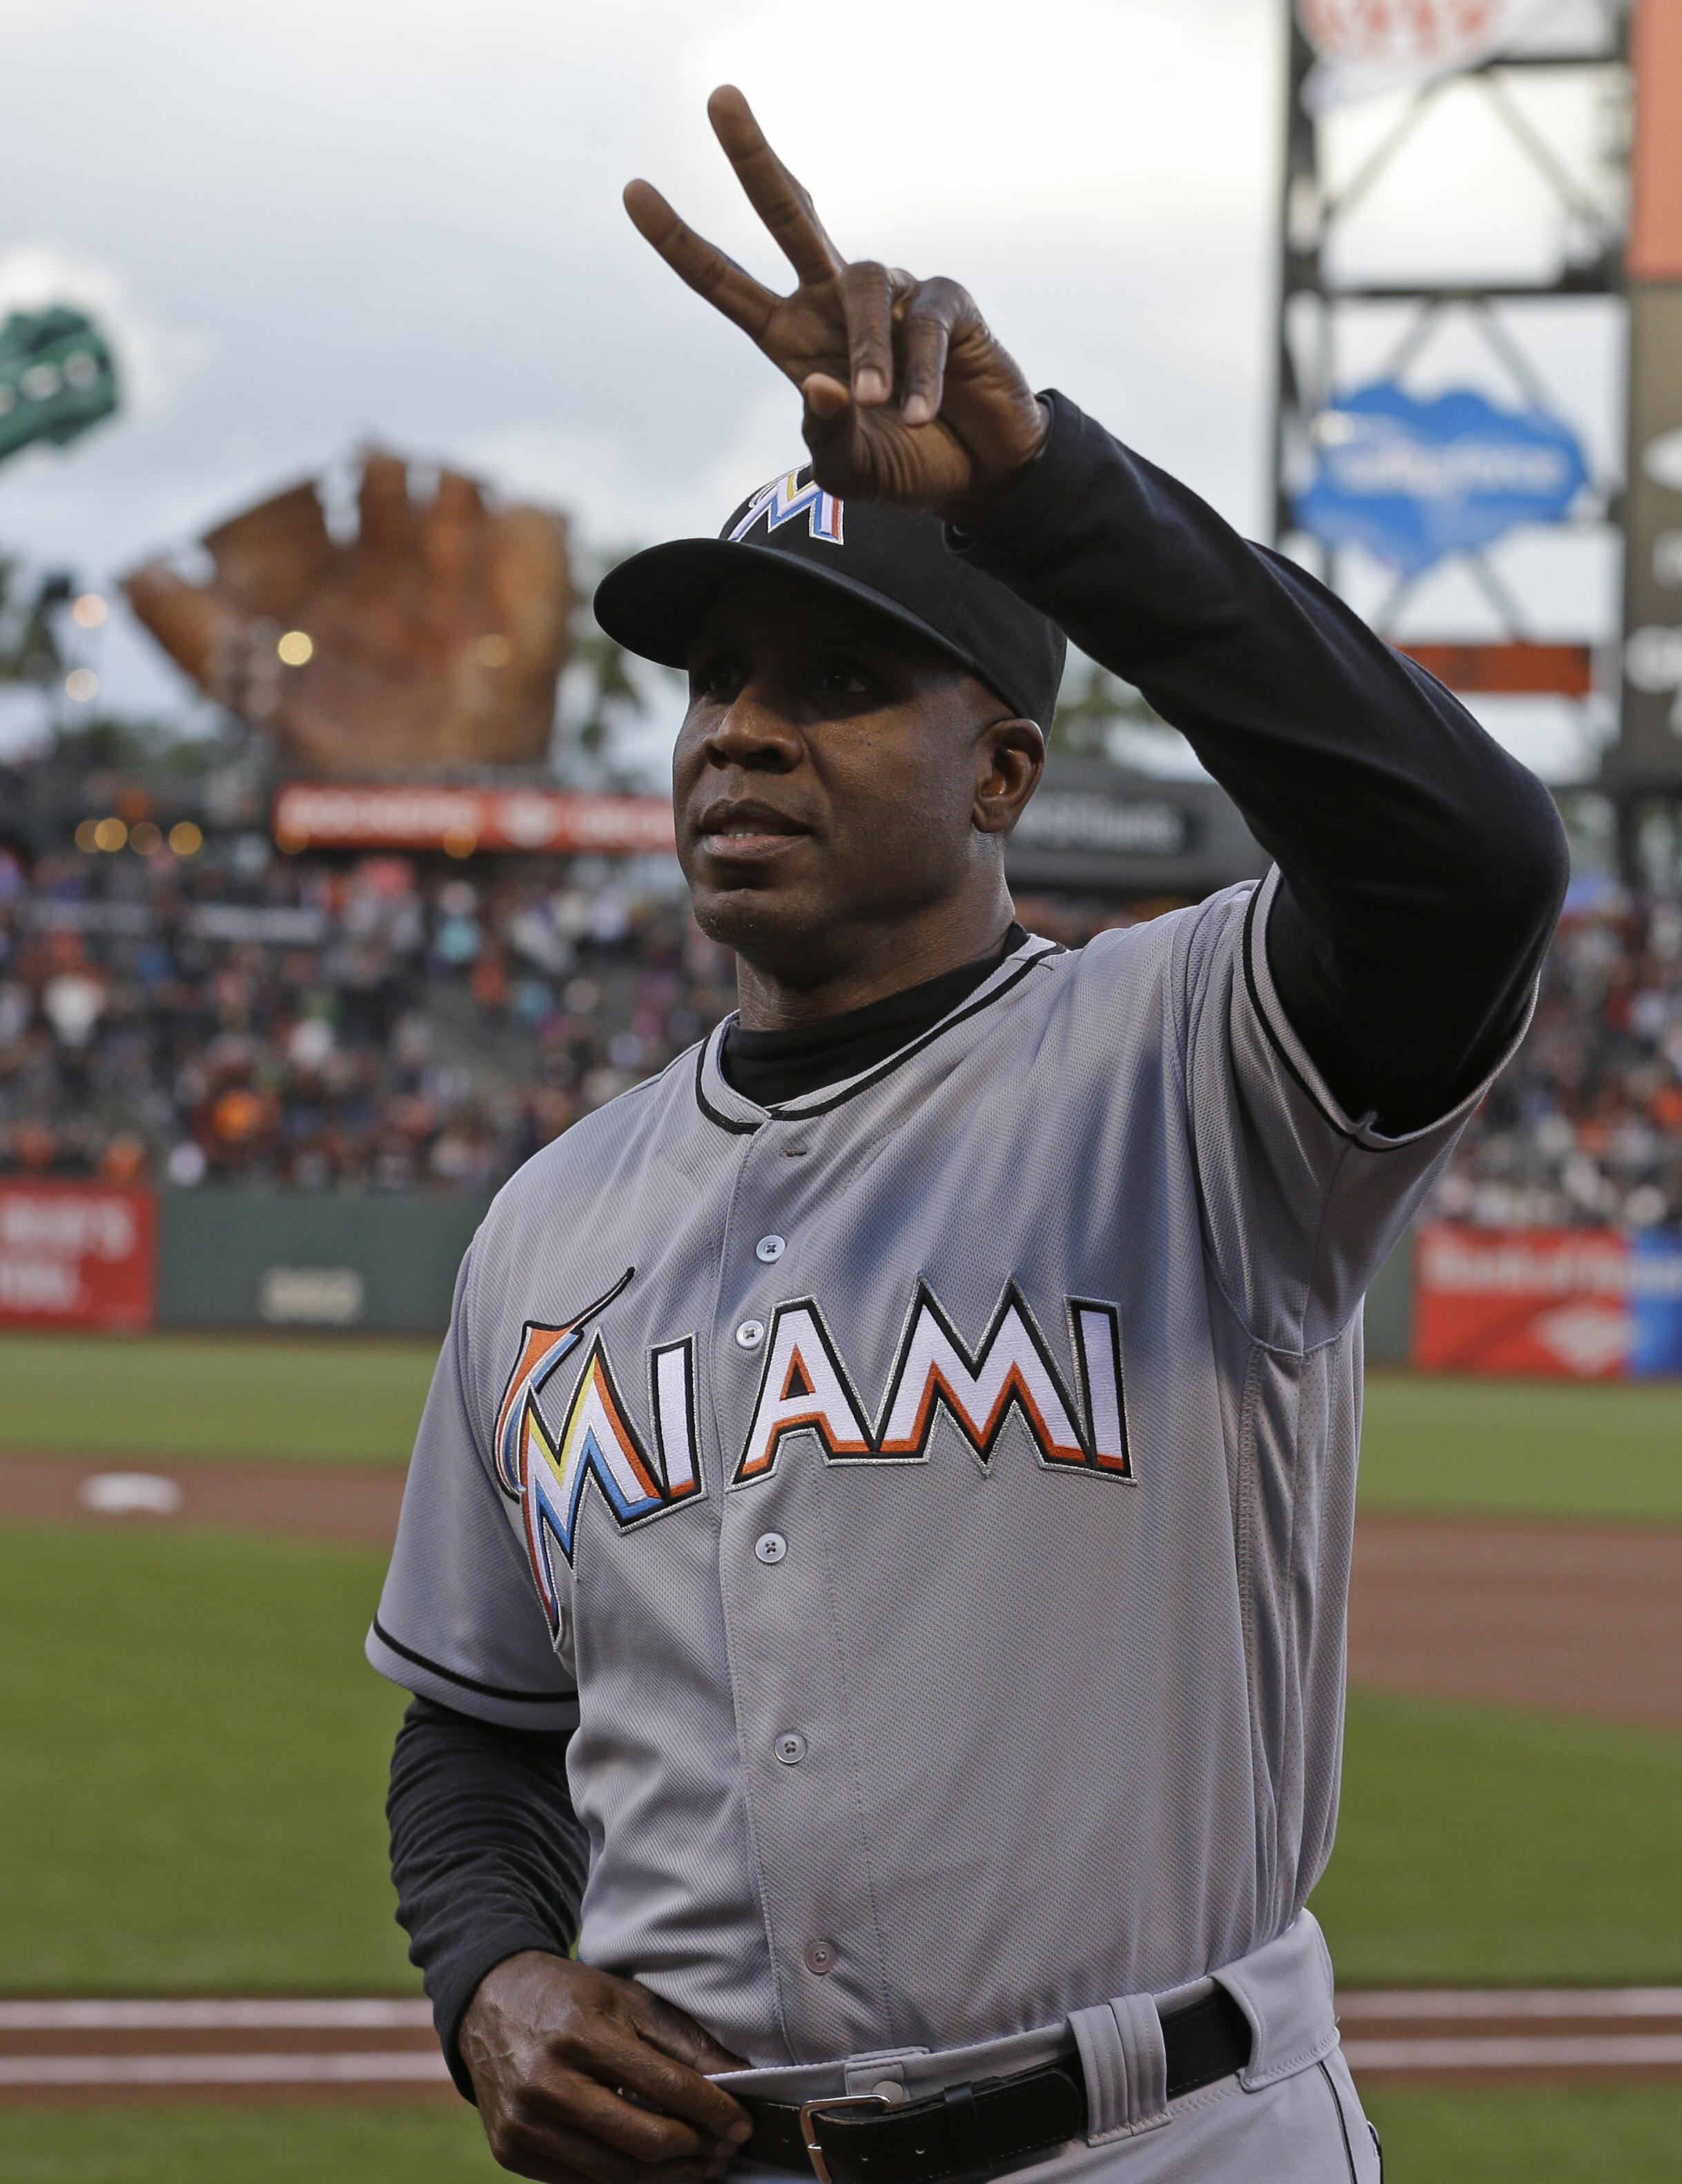 MLB Notes: Coach Barry Bonds returns to AT&T Park in a Marlins uniform |  The Spokesman-Review